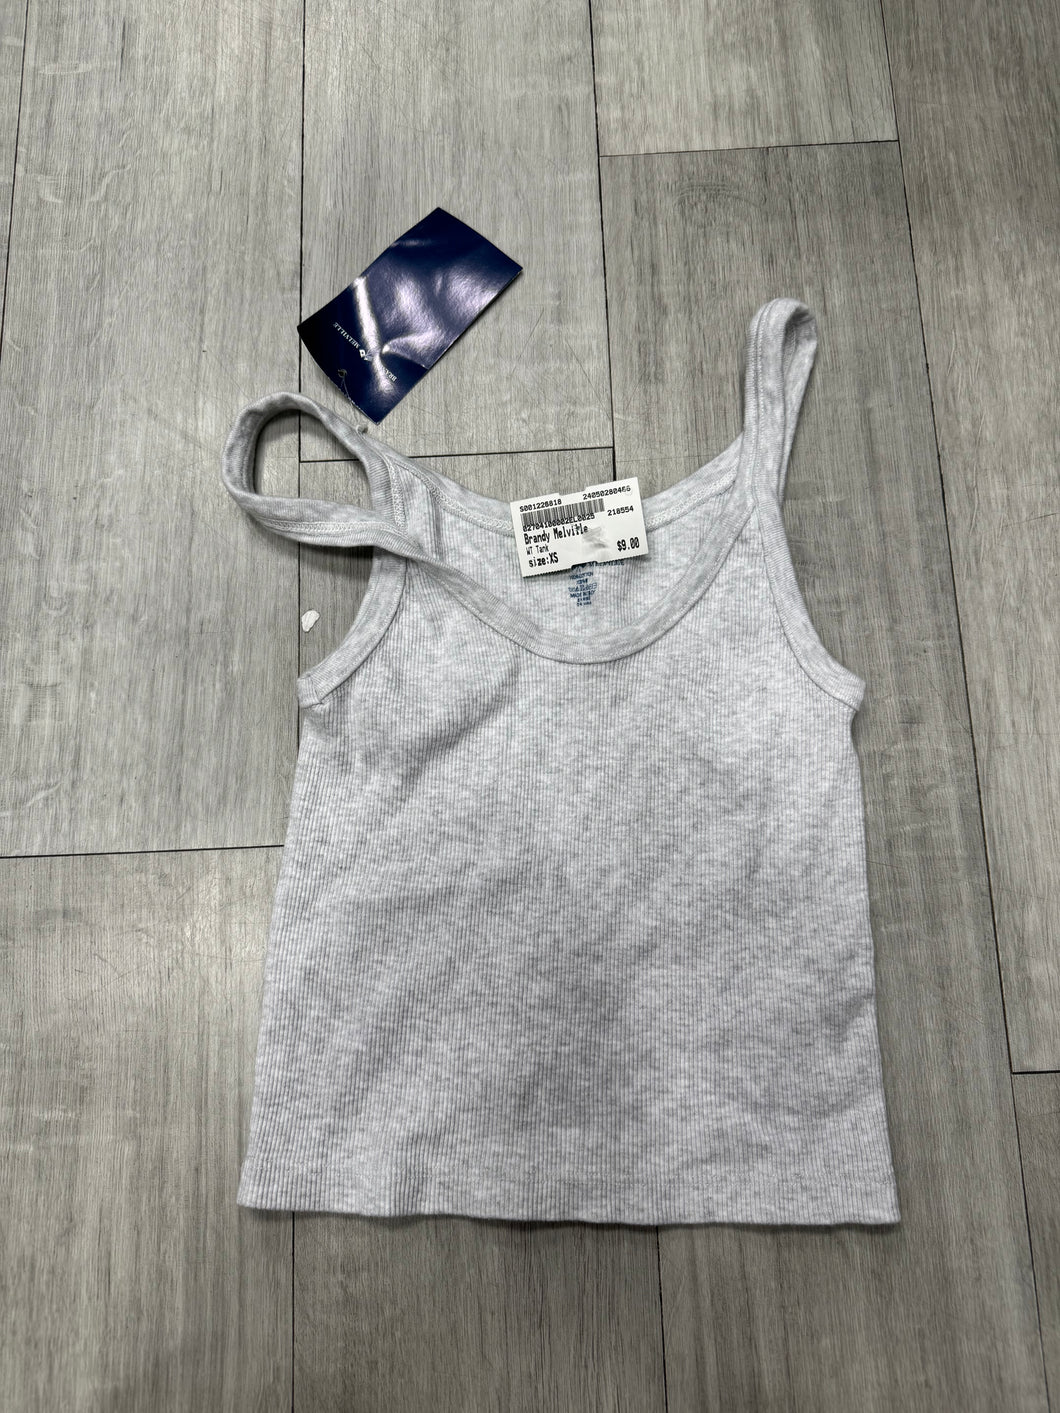 Brandy Melville Tank Top Size Extra Small 6818nwt